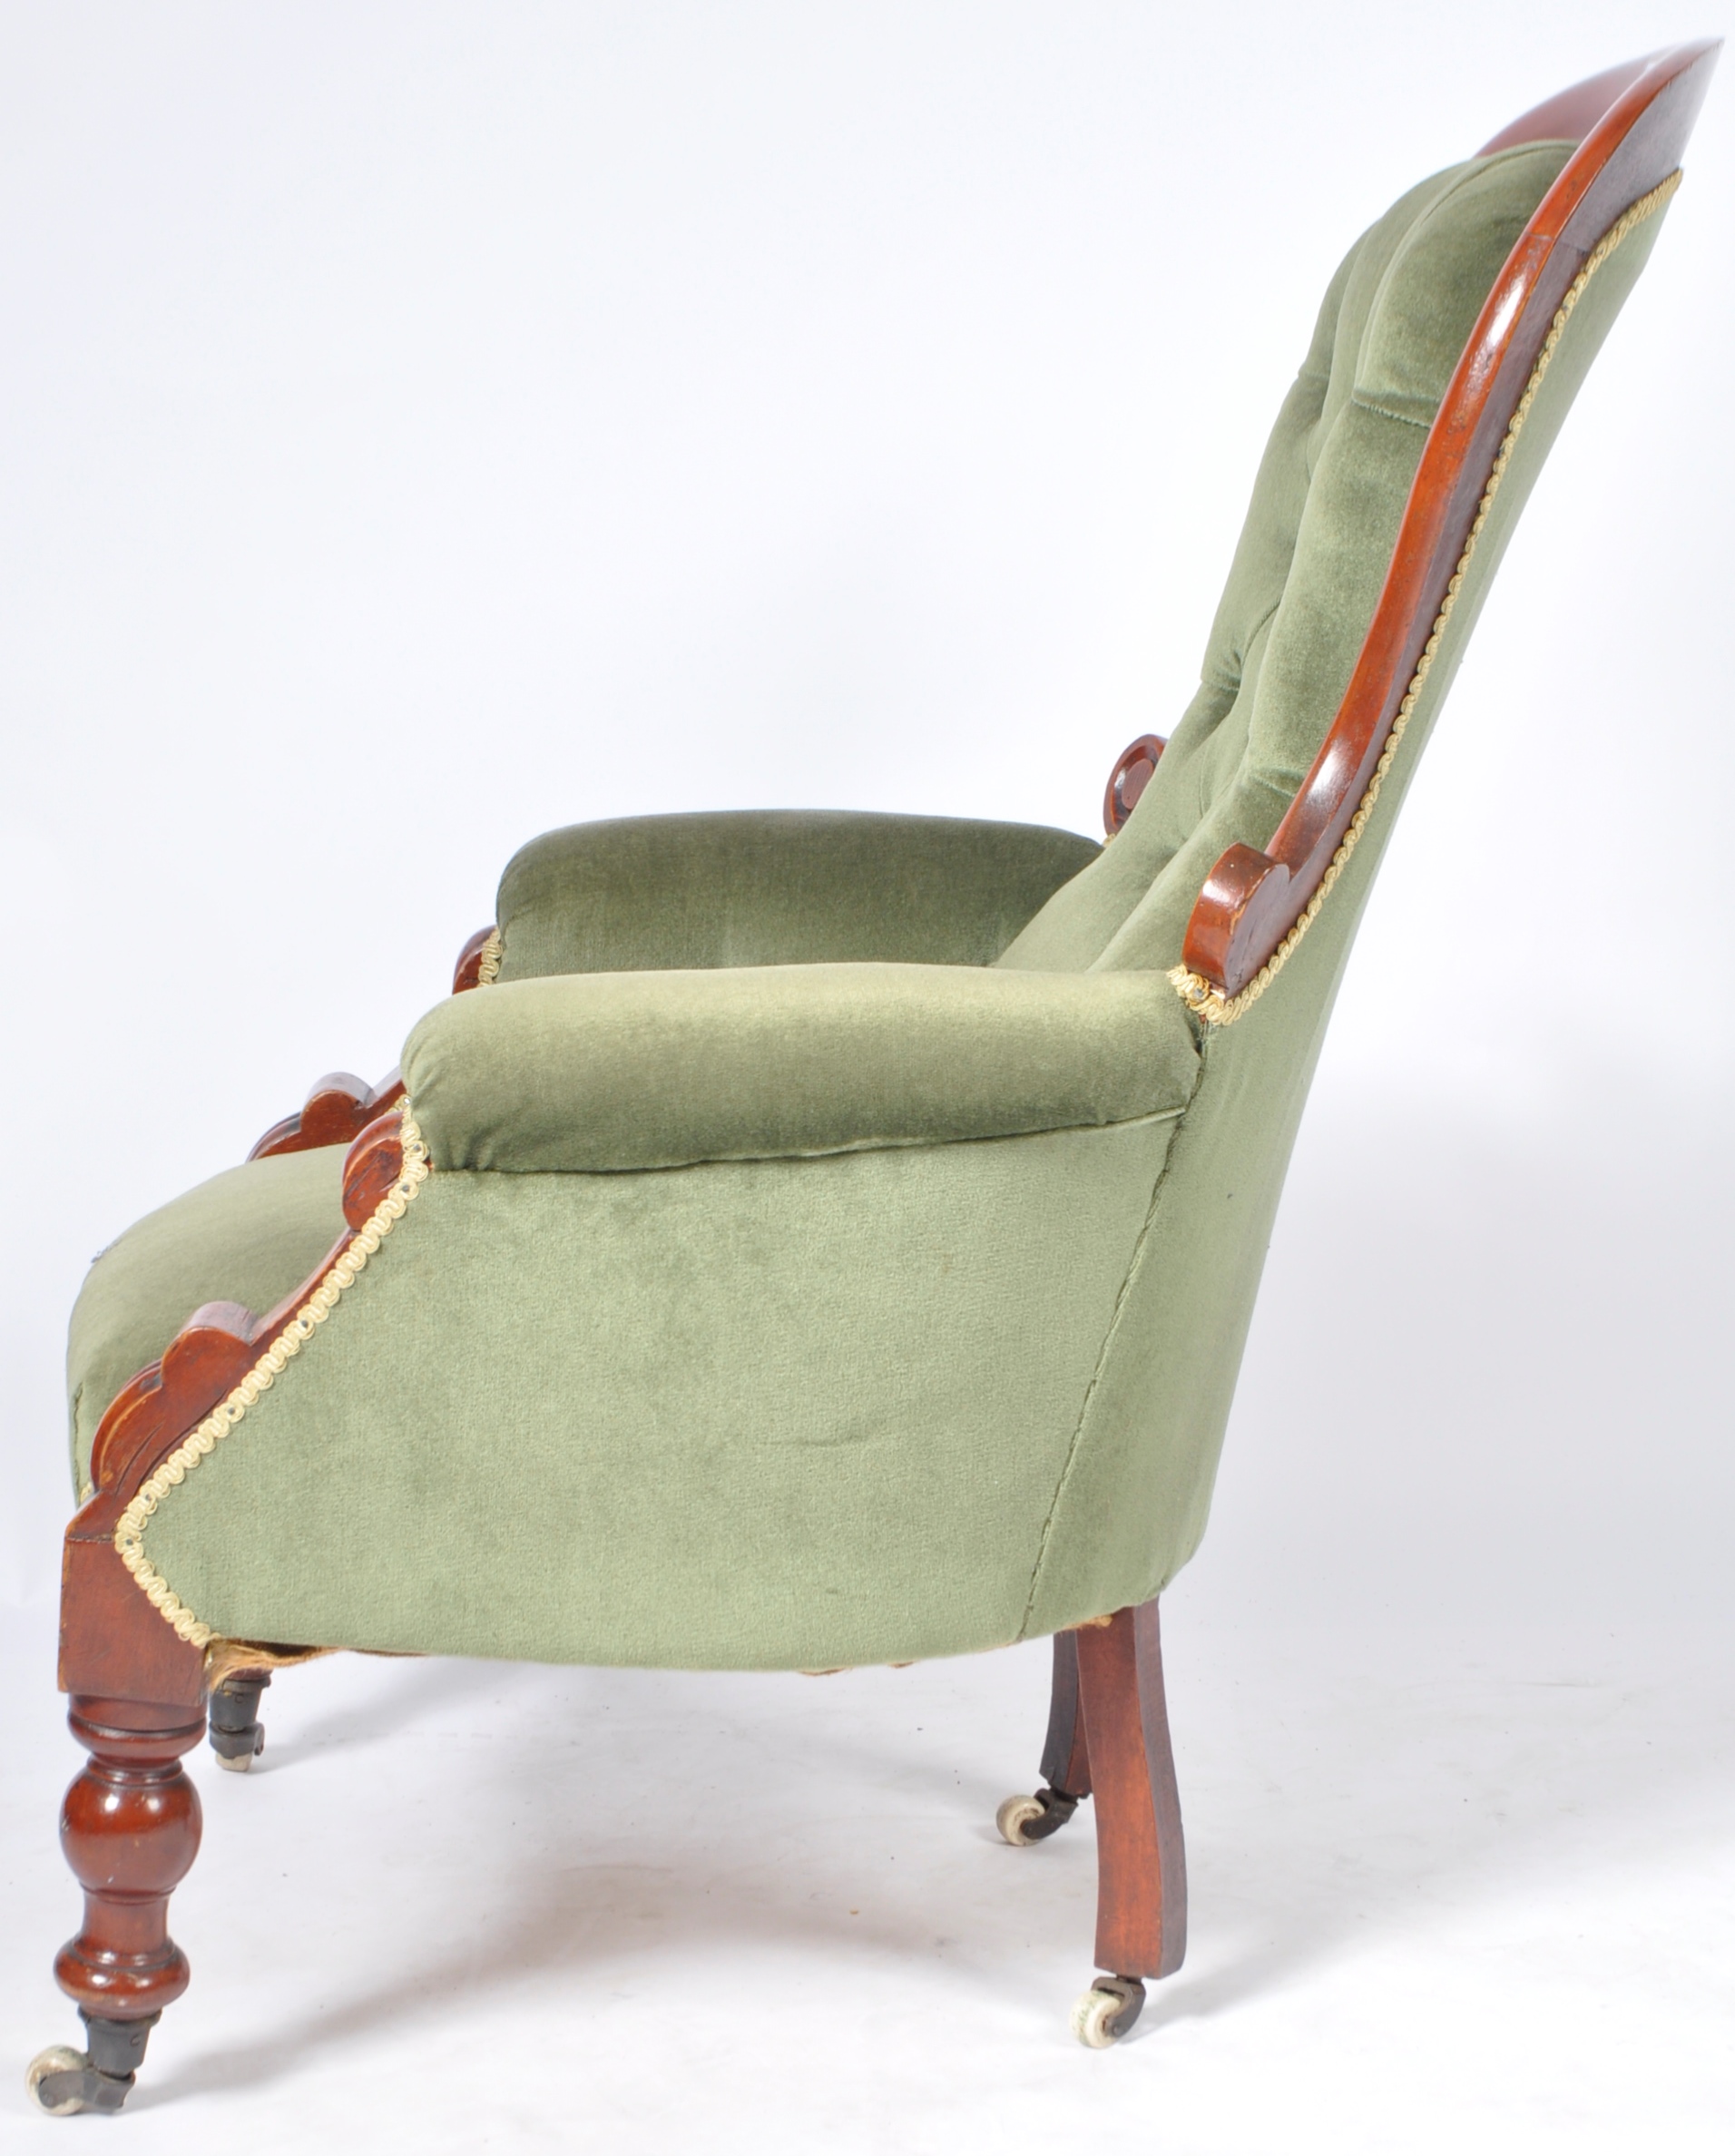 19TH CENTURY VICTORIAN MAHOGANY BUTTON BACK CHAIR - Image 9 of 9